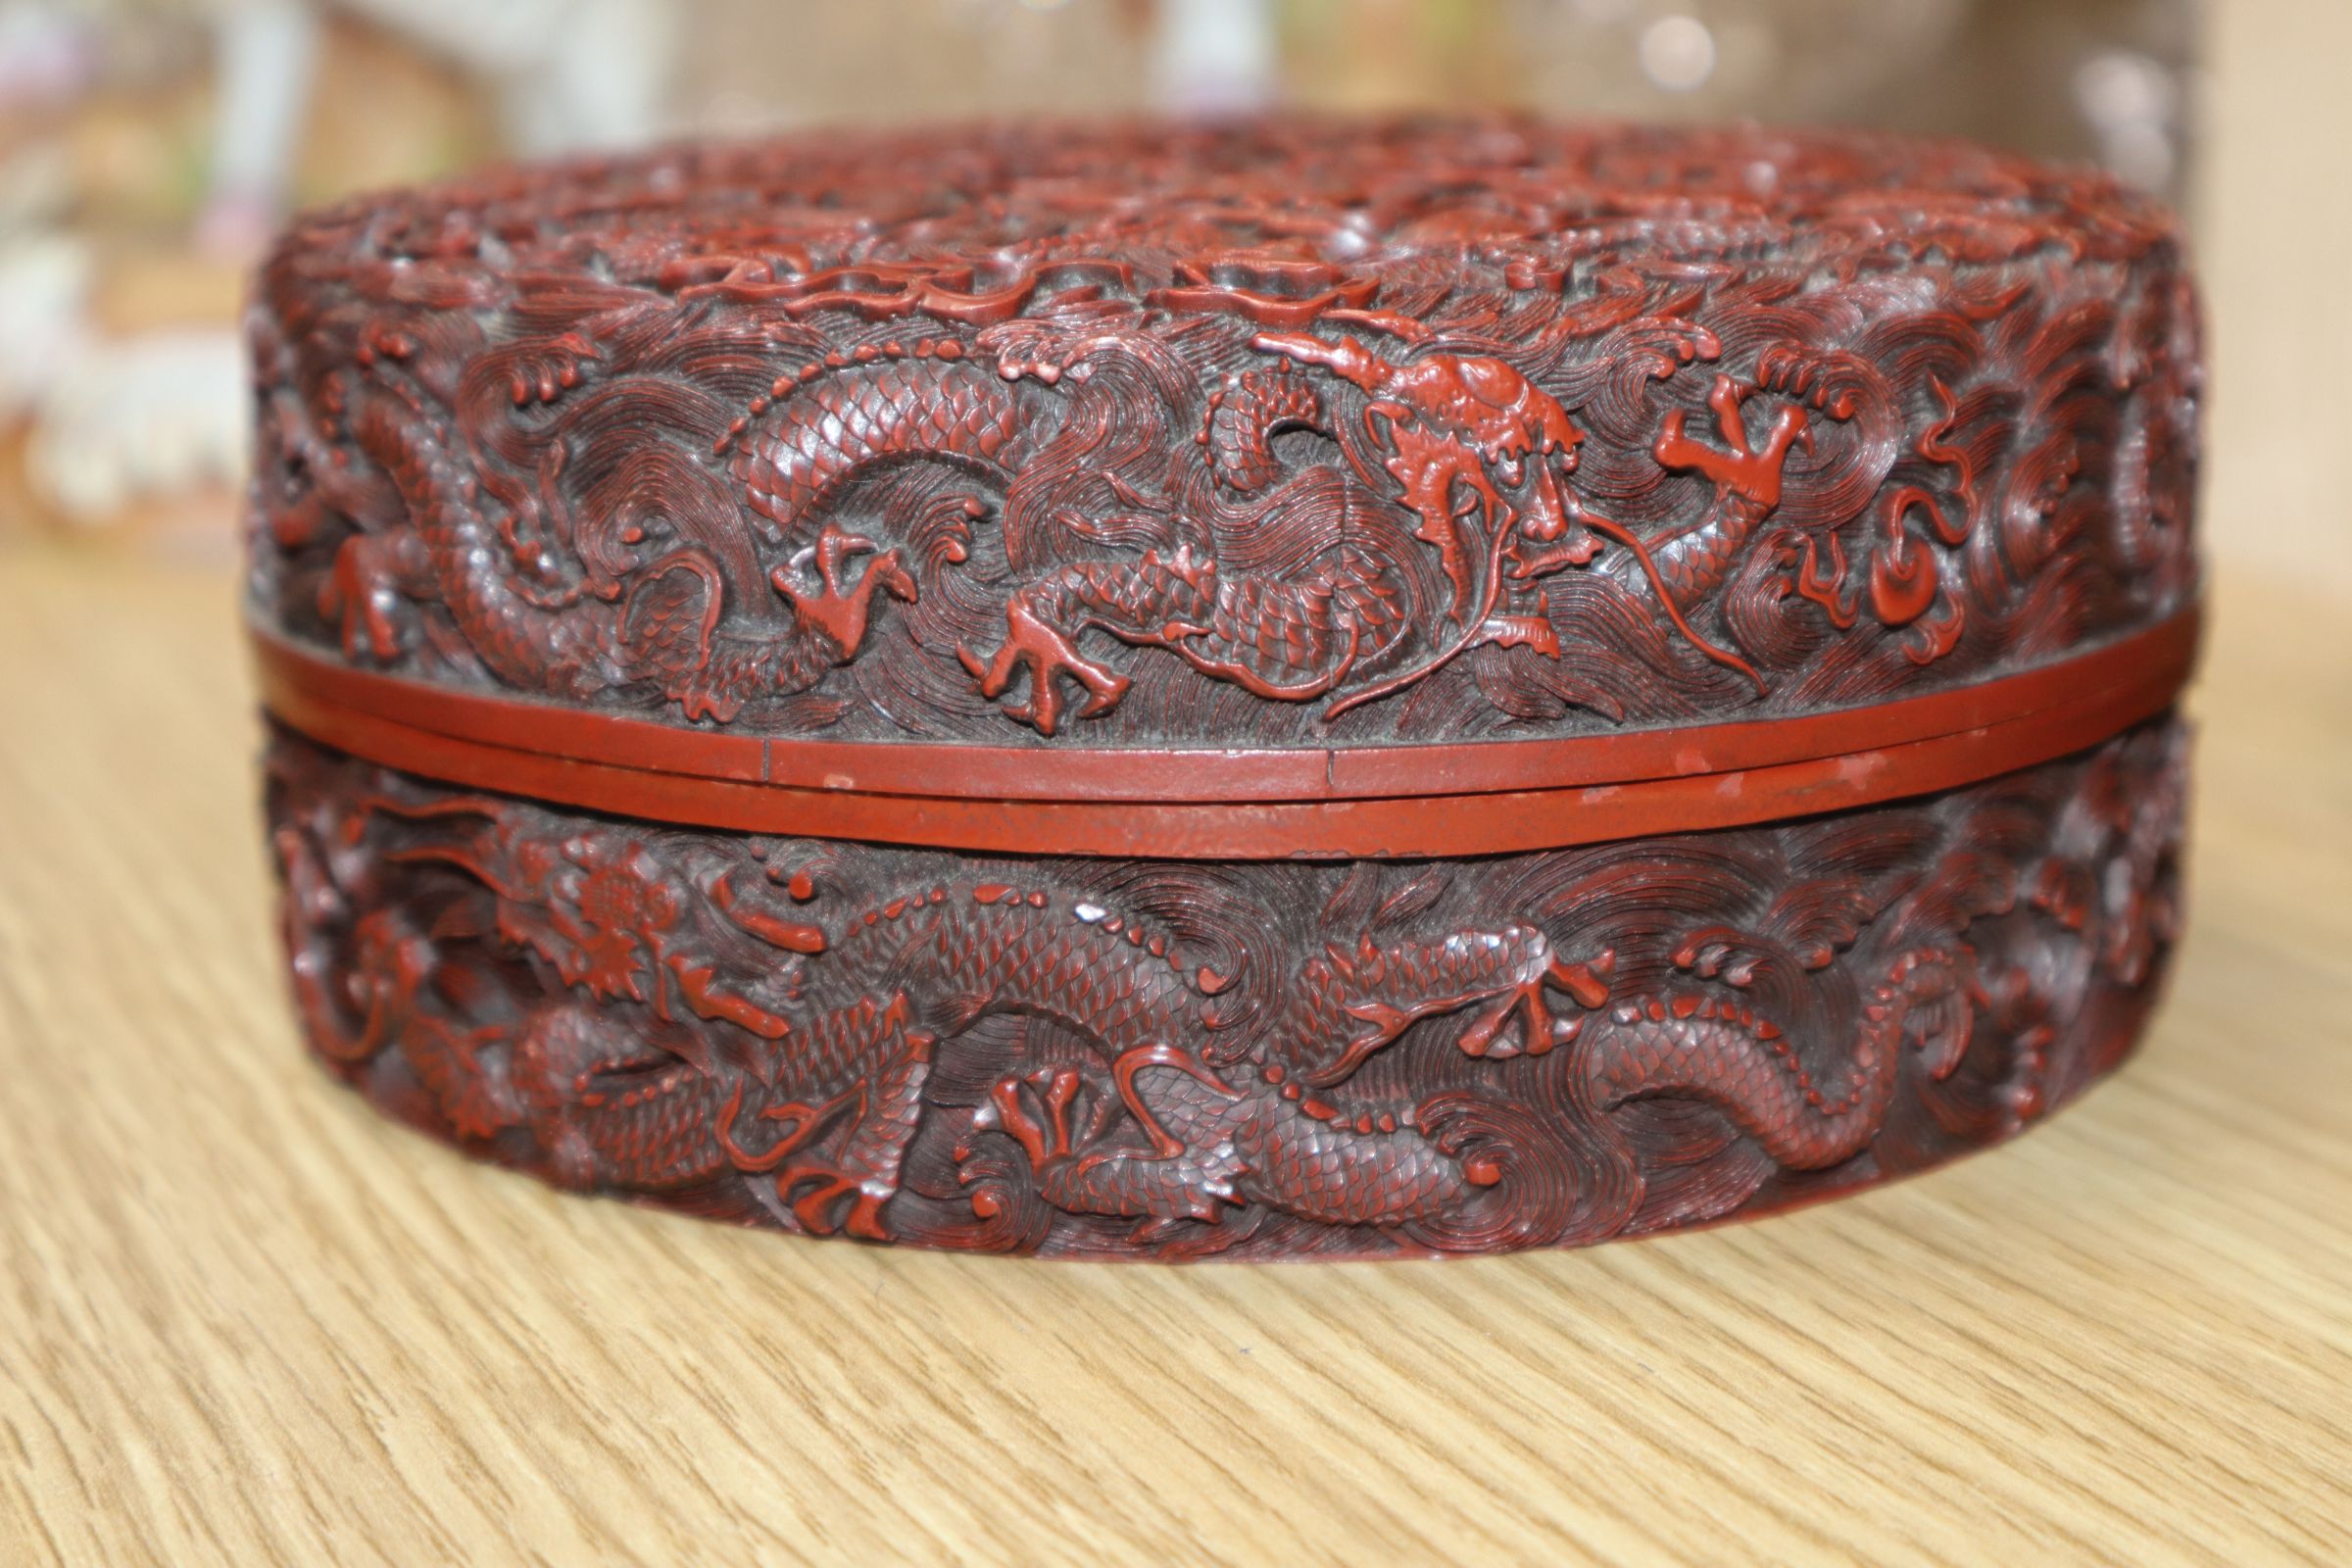 A Chinese bronze vase, a Persian dish and a 'Dragon' box dish diameter 36cm - Image 5 of 20